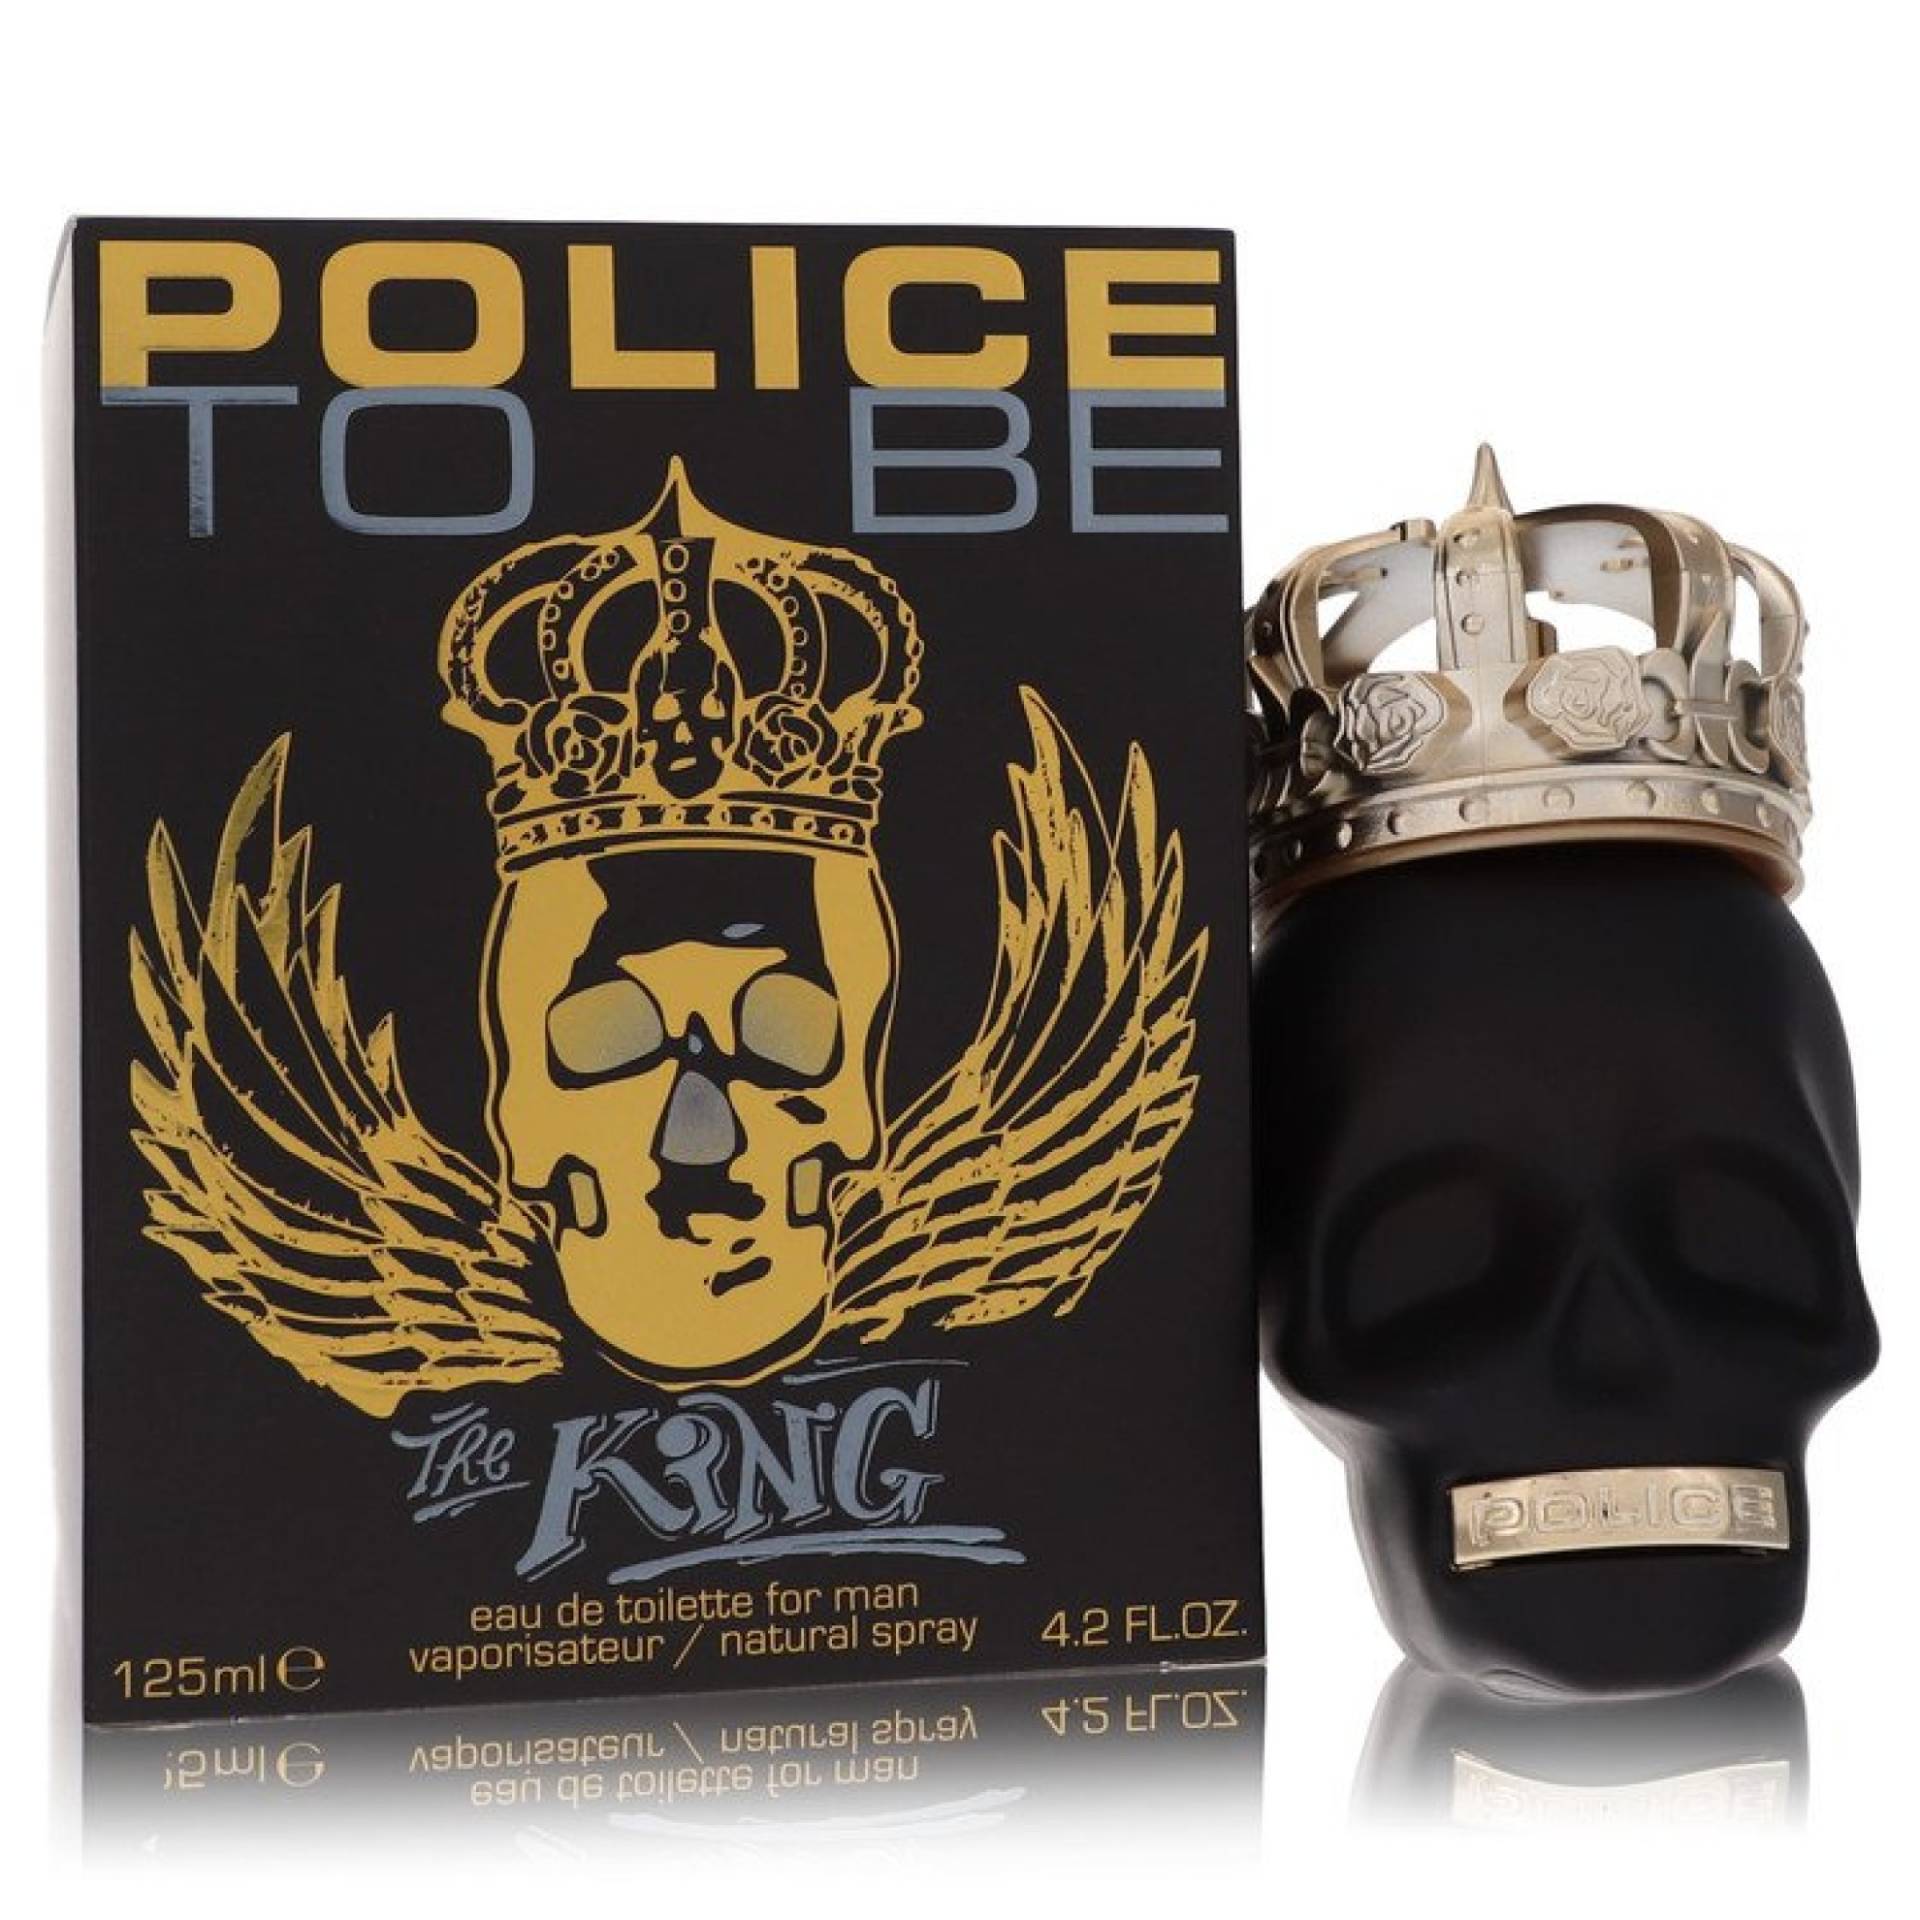 Police Colognes Police To Be The King Eau De Toilette Spray 125 ml von Police Colognes